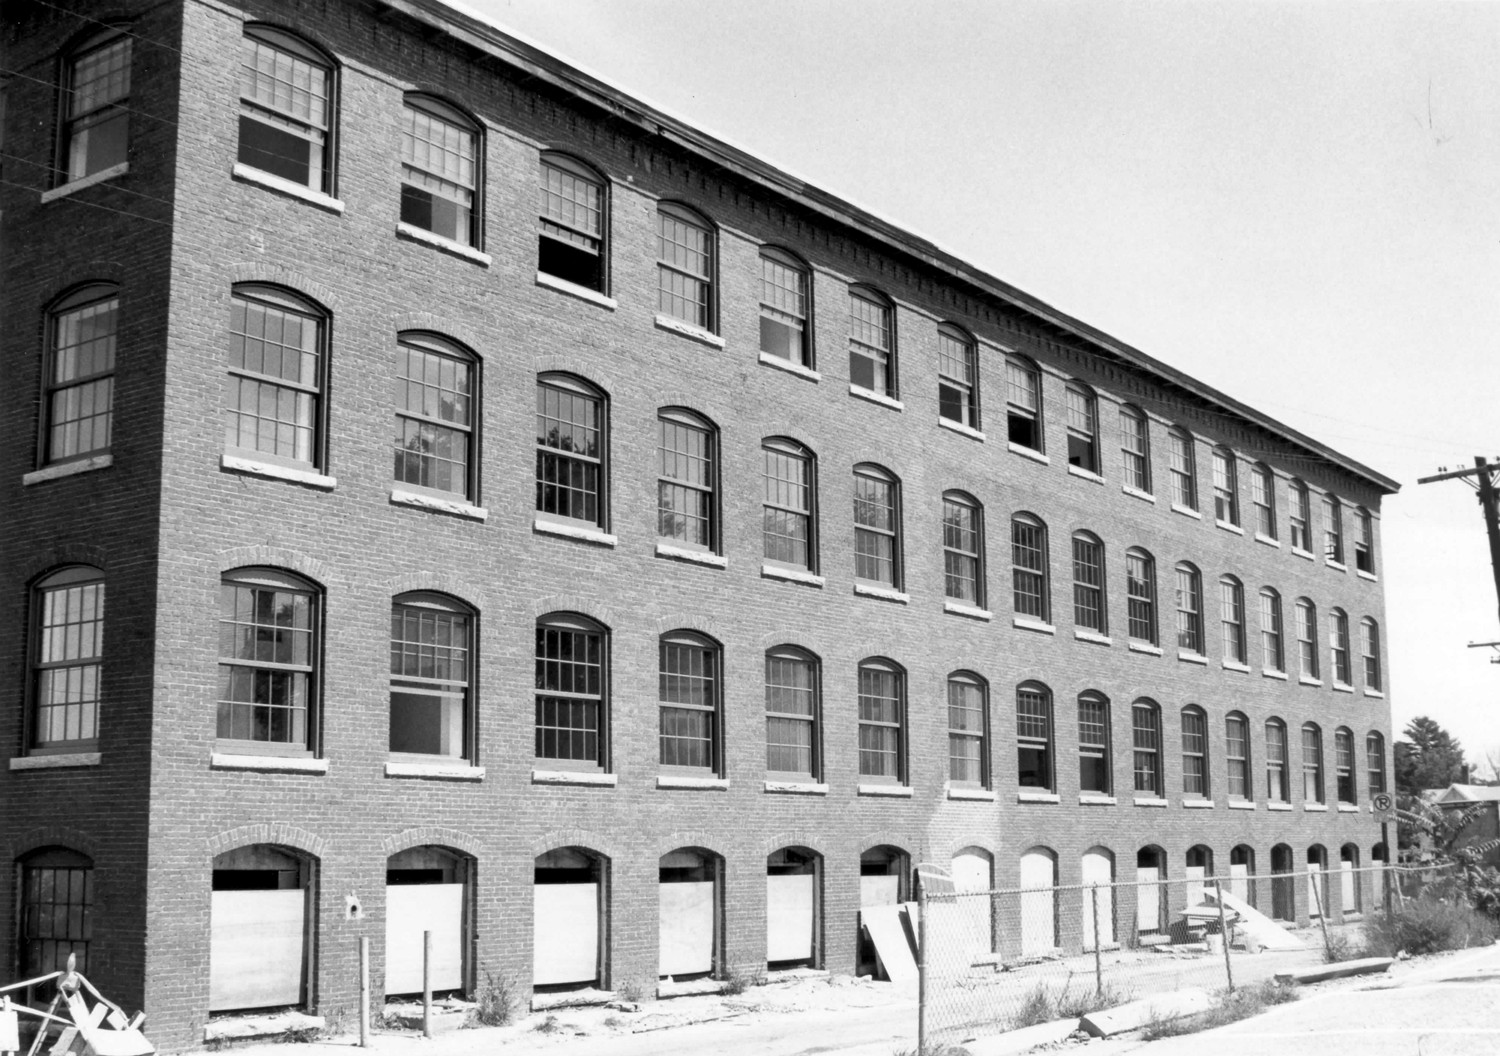 Kimball Brothers Shoe Factory, Manchester New Hampshire Looking southwest at north elevation, showing original part of building (1985)